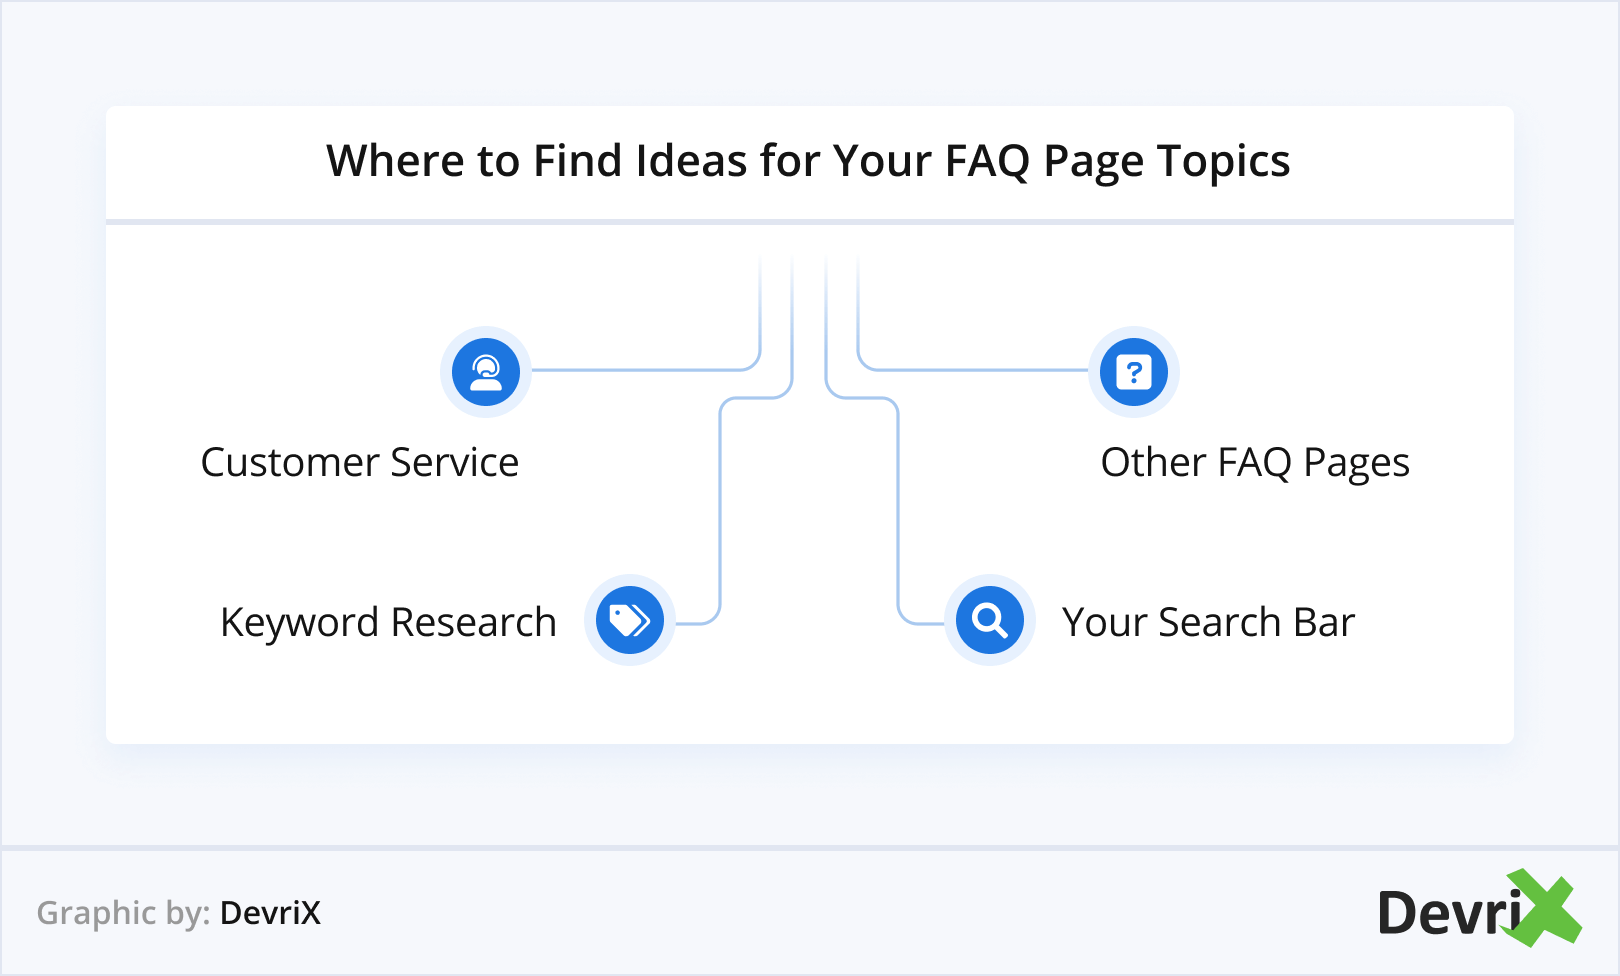 Where to Find Ideas for Your FAQ Page Topics